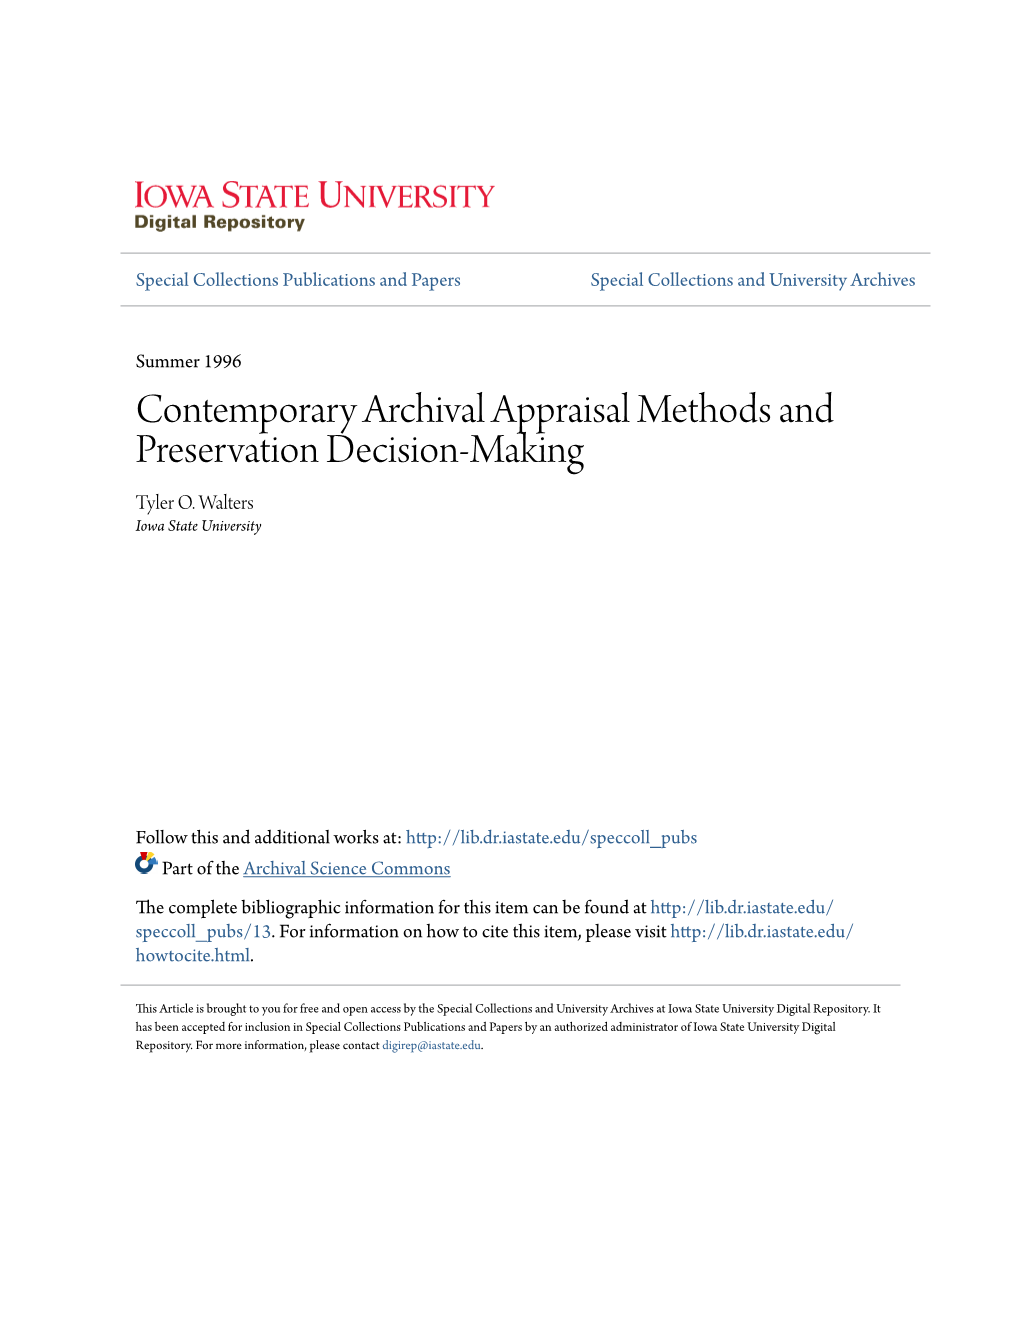 Contemporary Archival Appraisal Methods and Preservation Decision-Making Tyler O